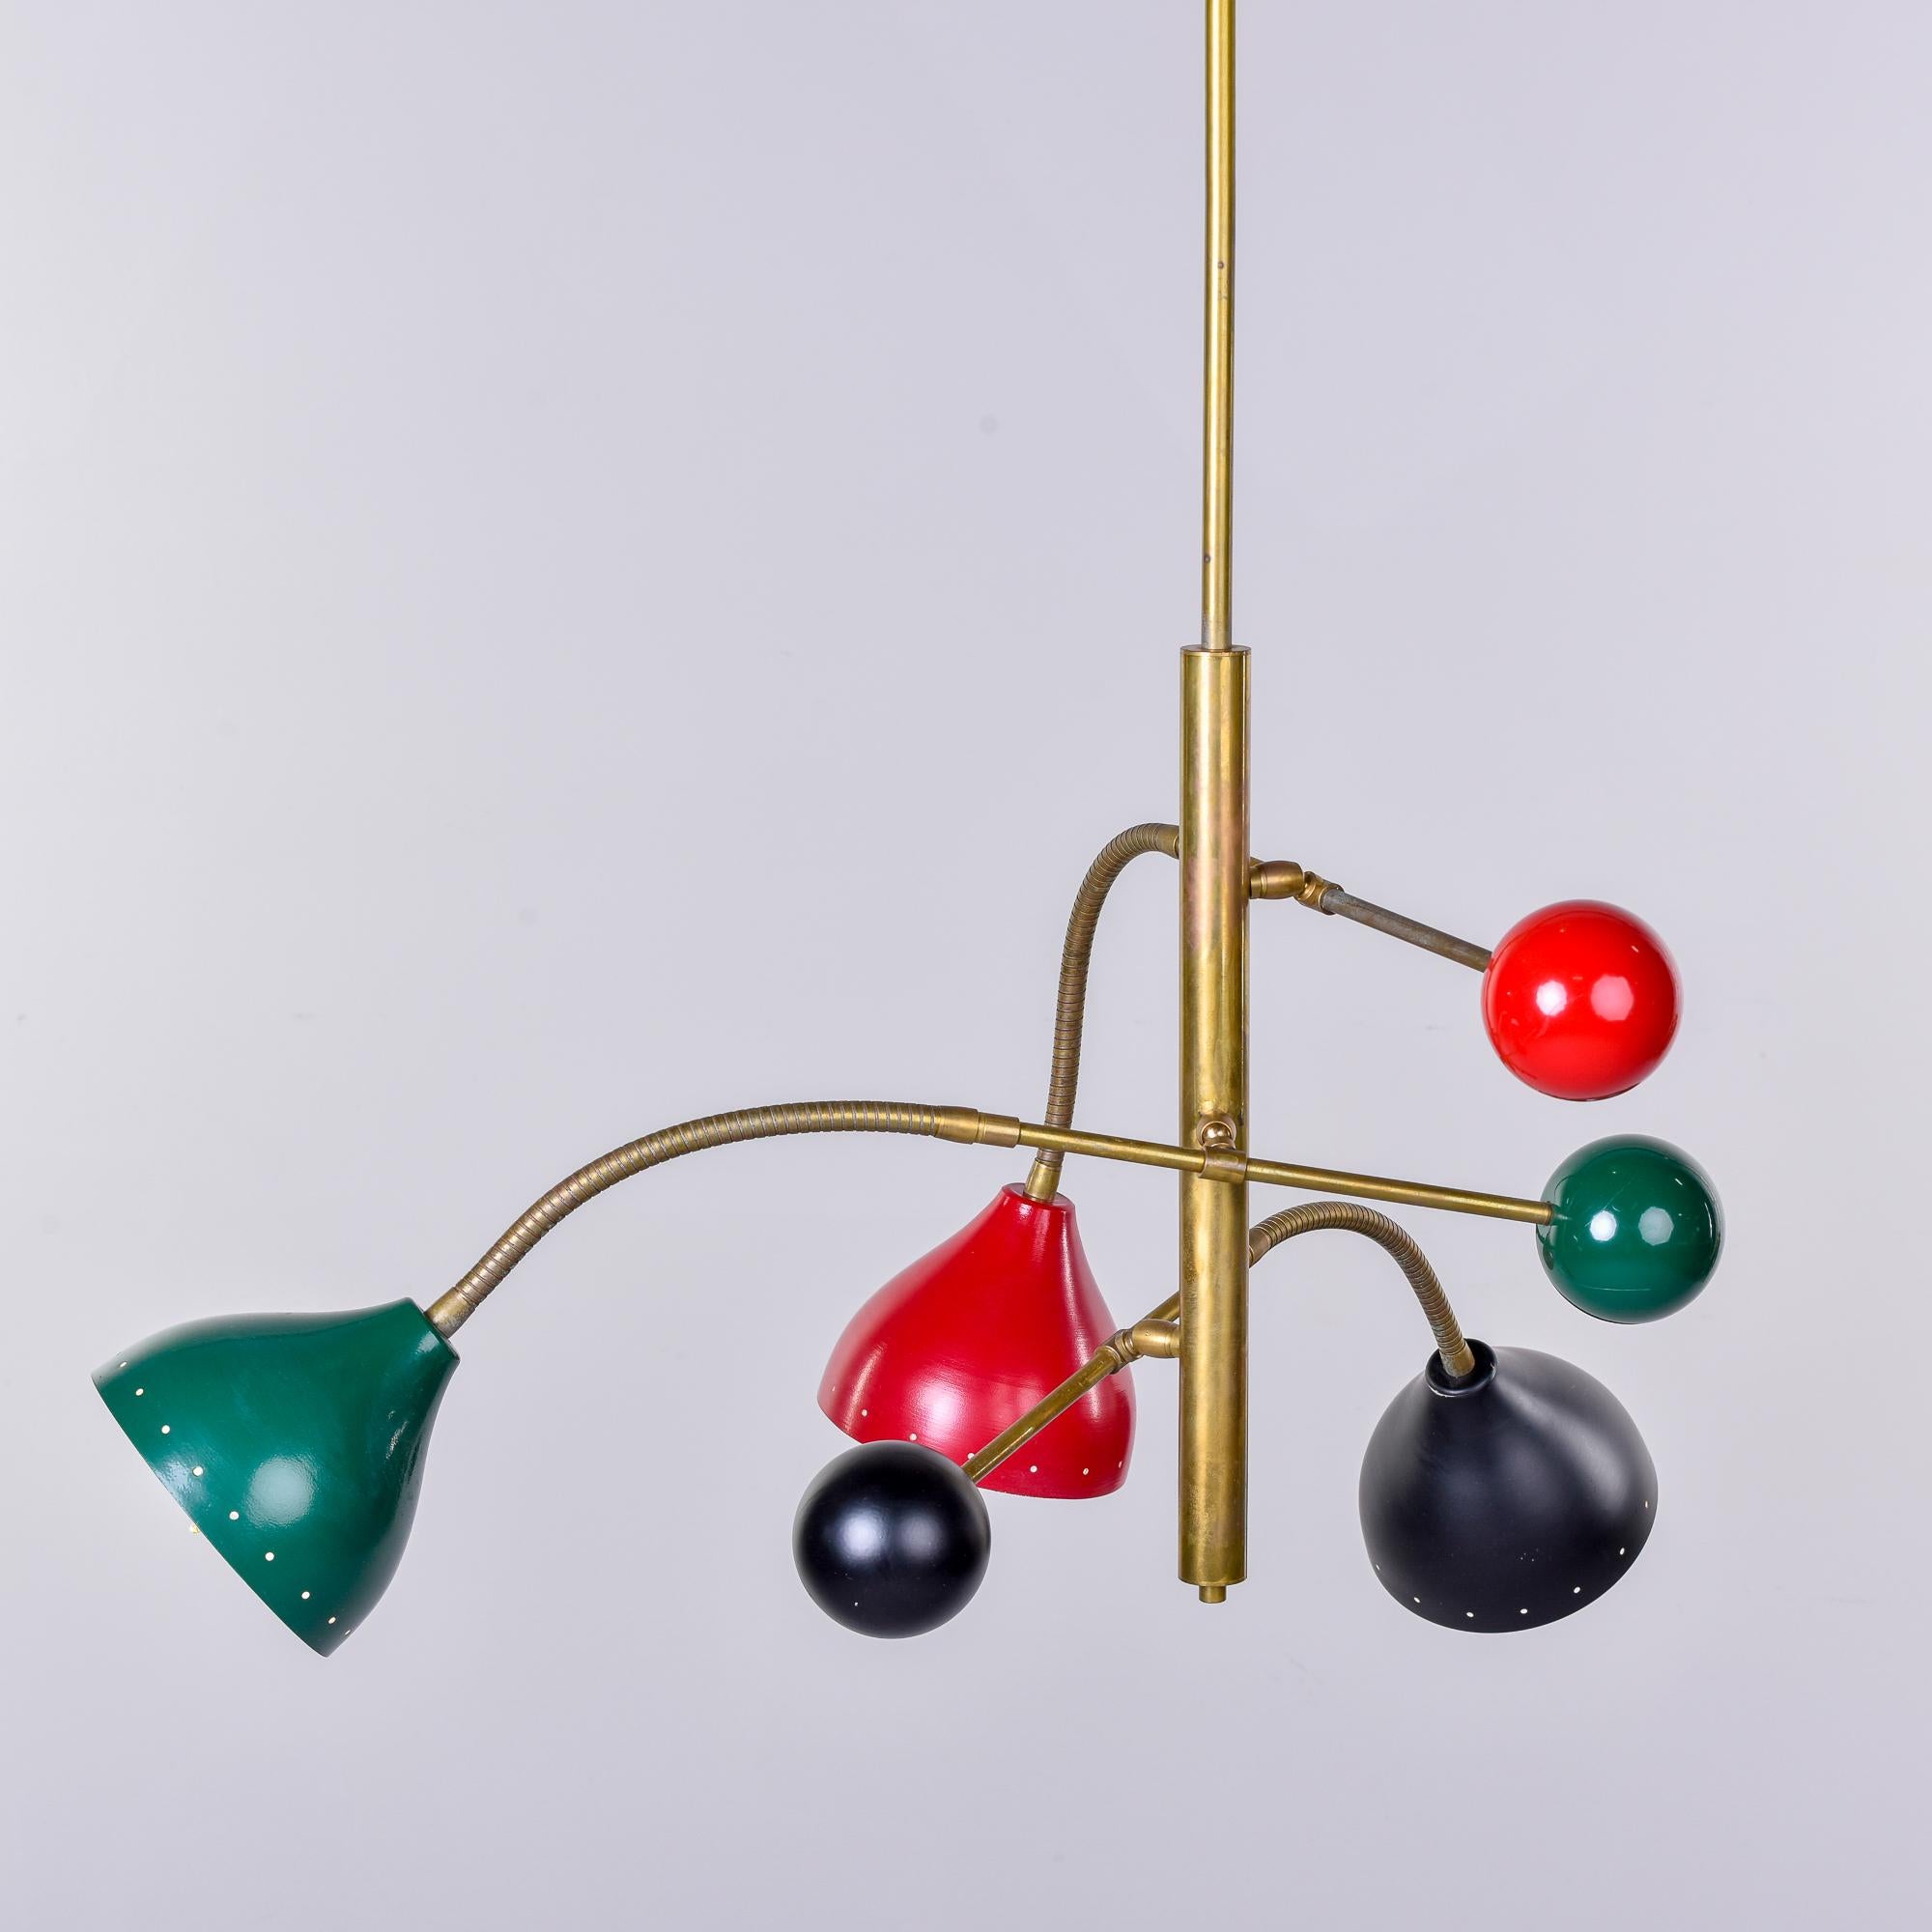 Found in Italy, this three light multicolor fixture is attributed to Stilnovo. The hanging pendant has three light arms and each has a brass stem with a bendable section near the shade end along with a rigid brass section of arm near the sphere at